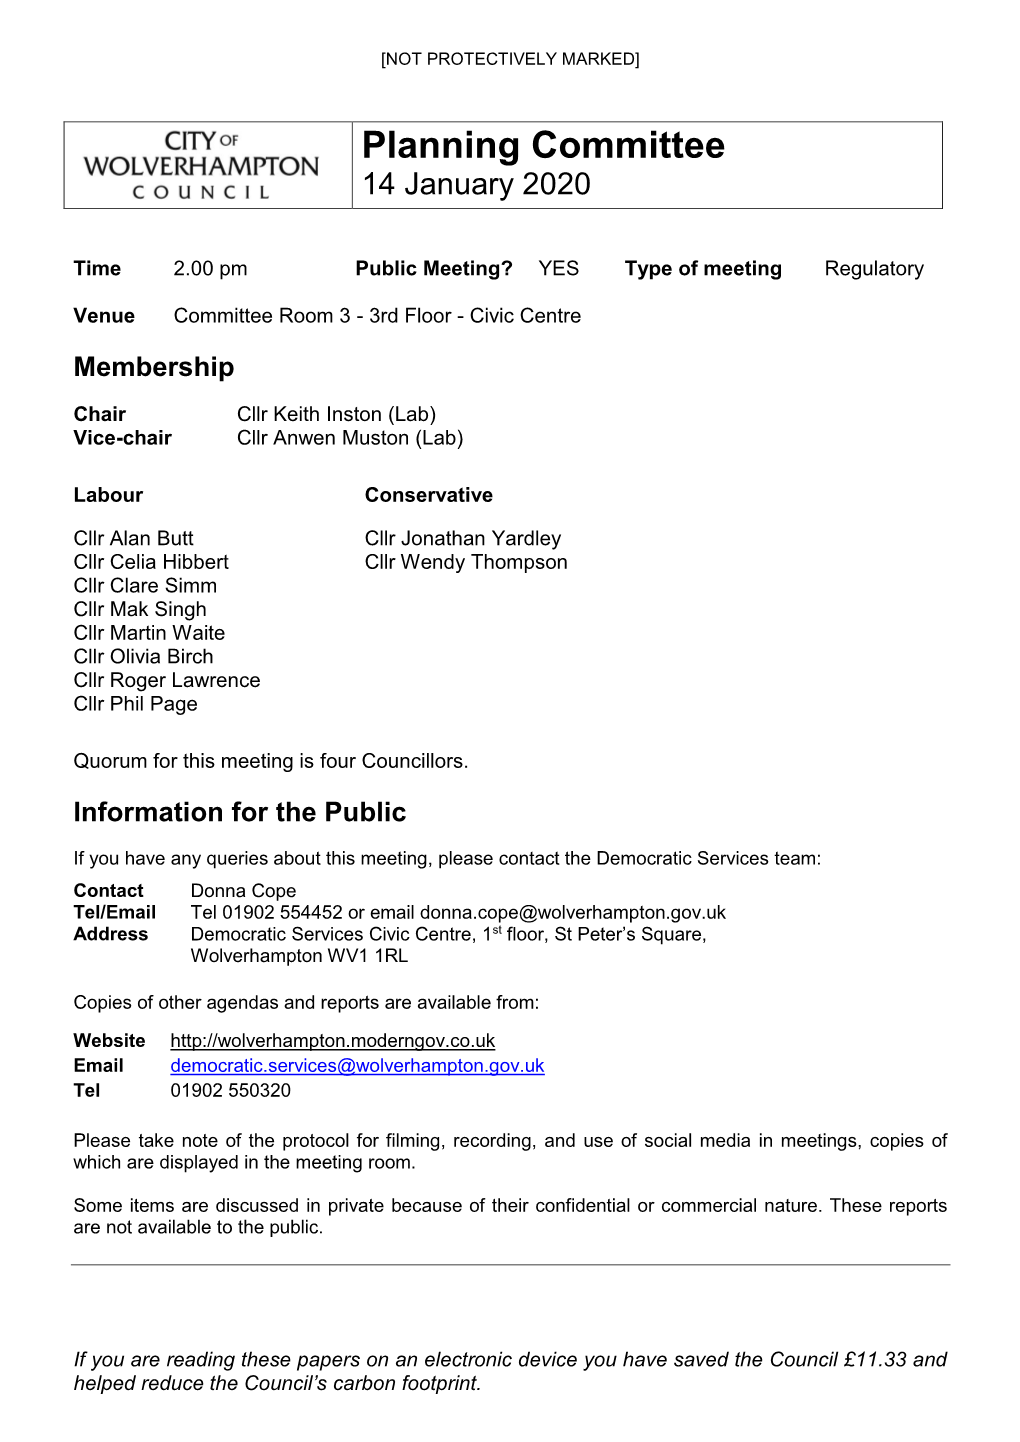 (Public Pack)Agenda Document for Planning Committee, 14/01/2020